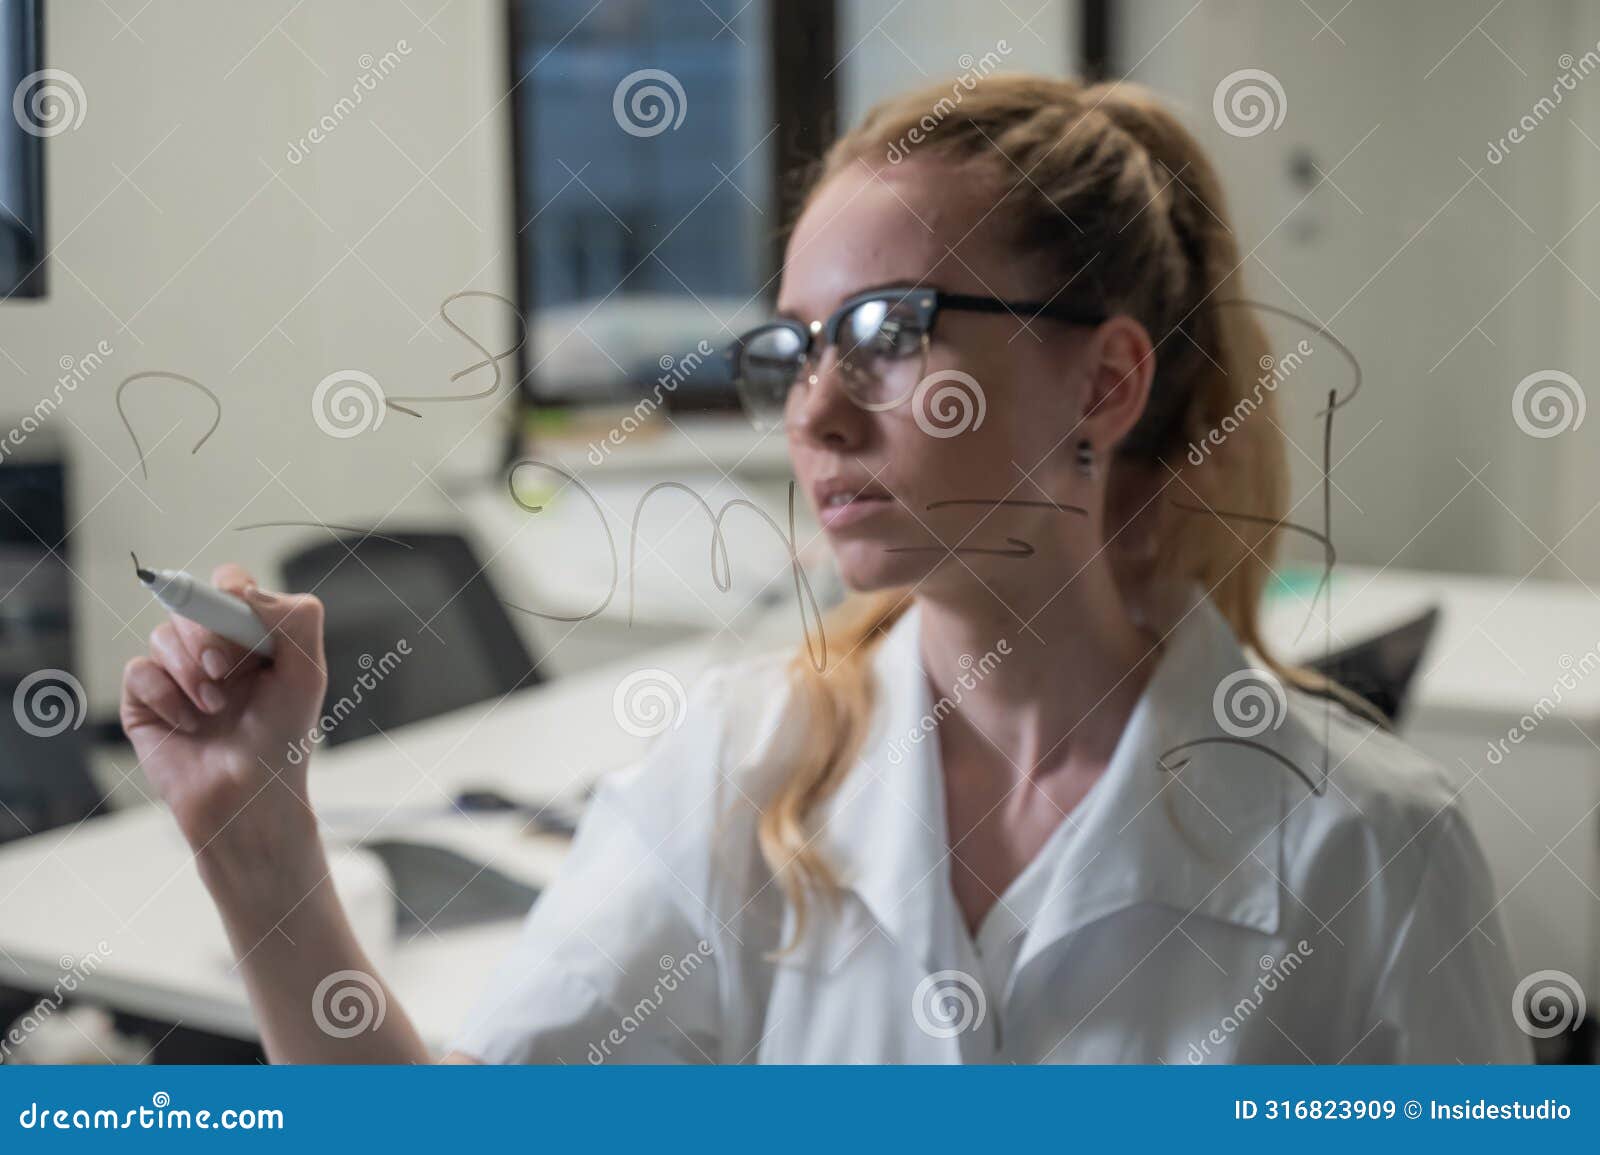 a caucasian woman in a medical gown thinks and finalizes formulas on a transparent wall.